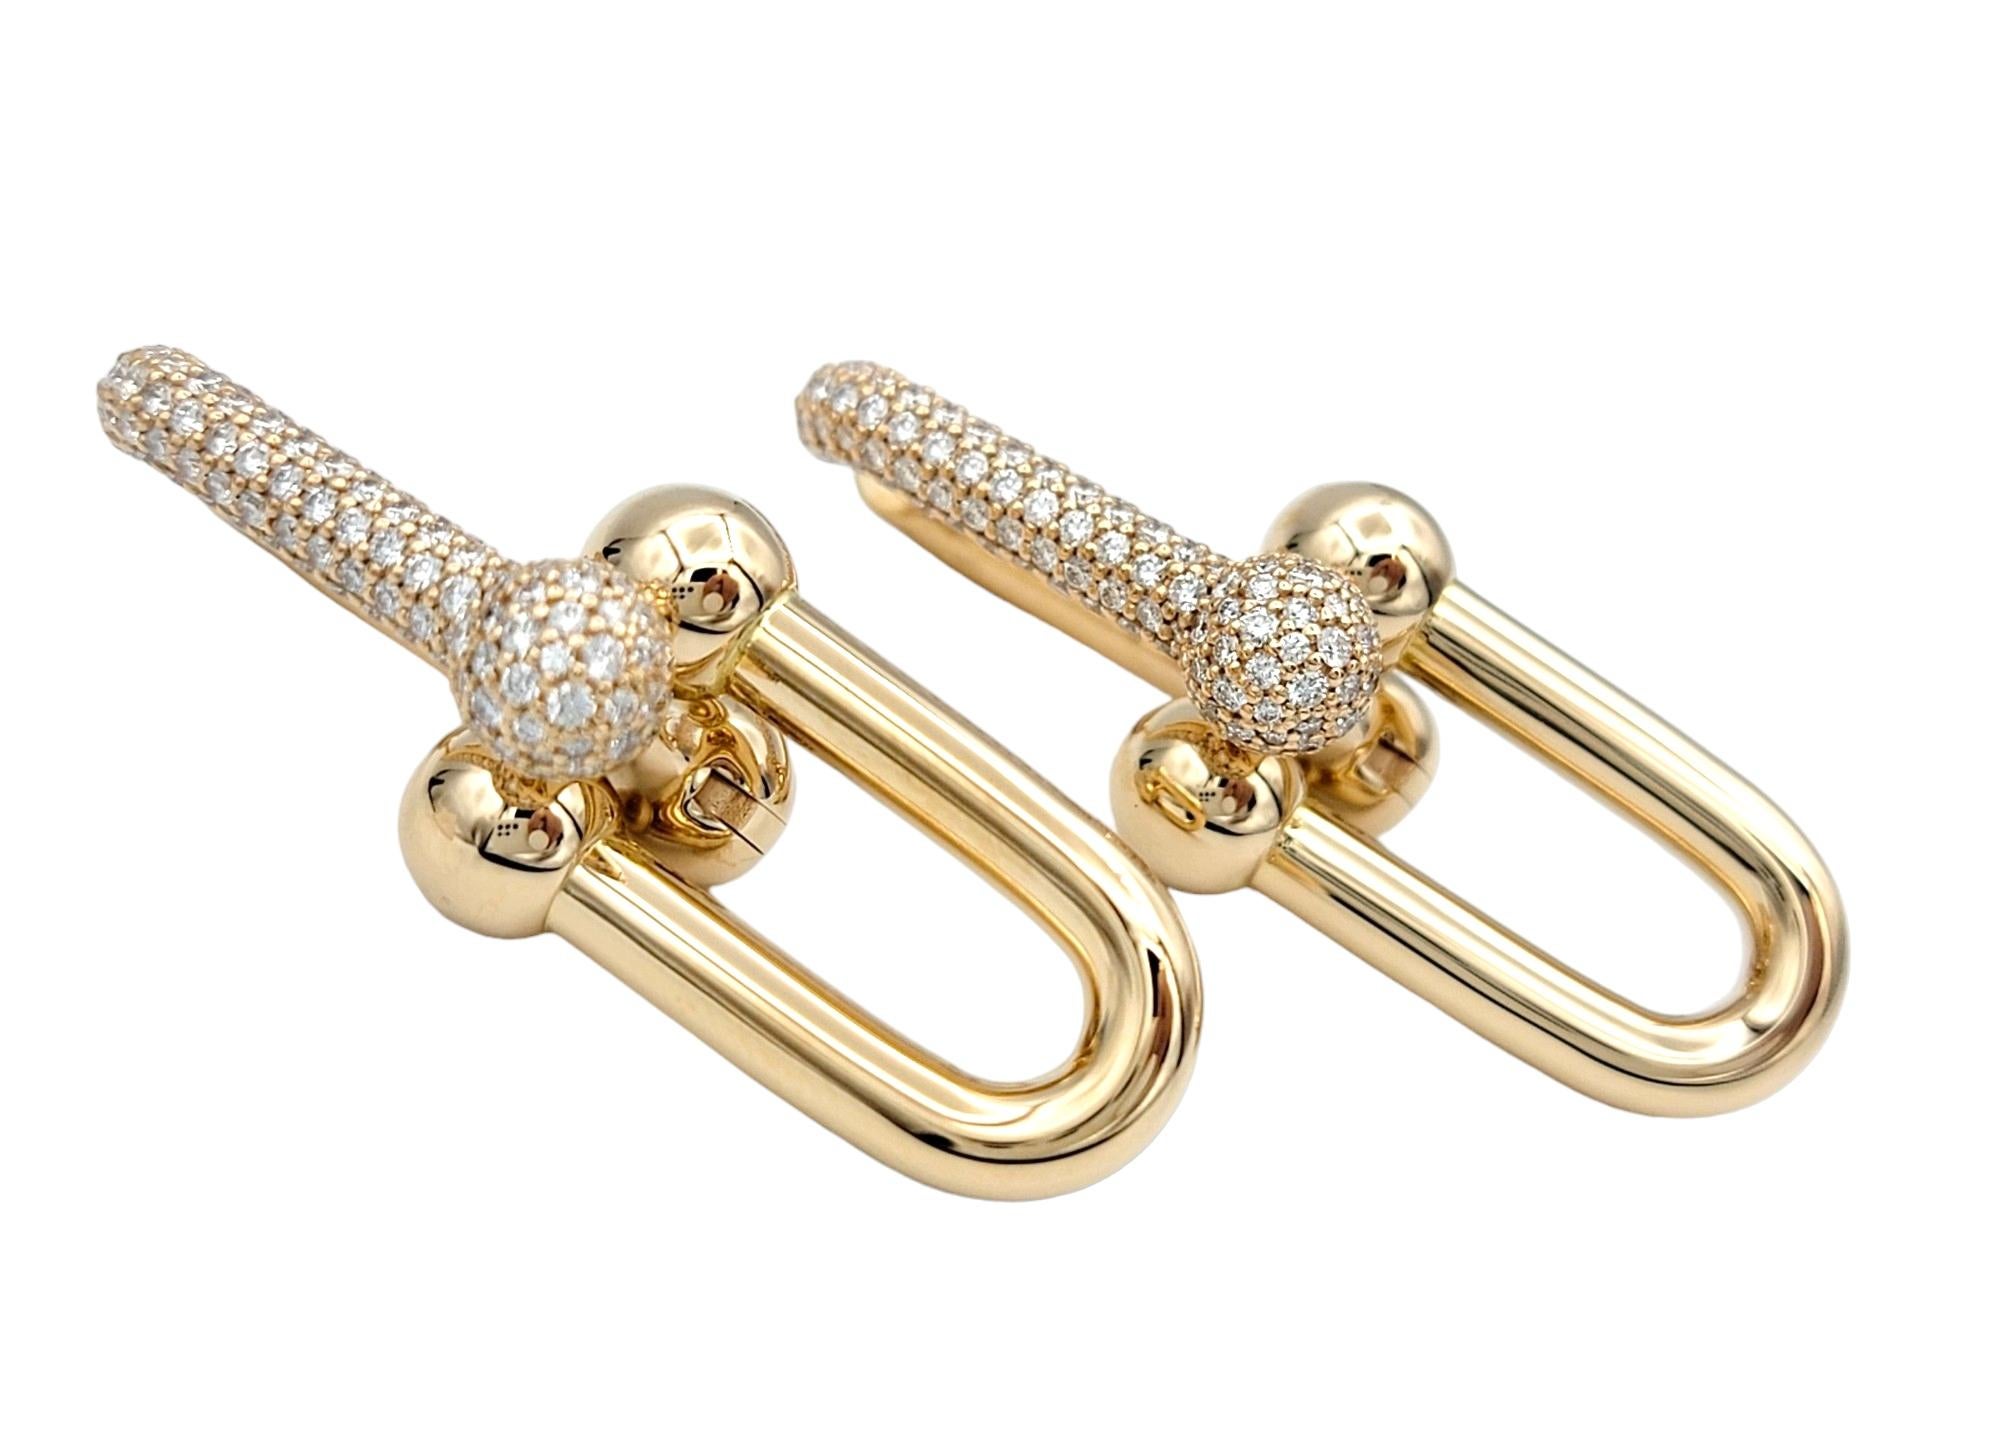 These incredible Tiffany & Co. earrings from their coveted HardWear Collection are a striking testament to modern elegance. The use of 18 karat rose gold adds a contemporary warmth to the design, enhancing the overall allure of the piece. The